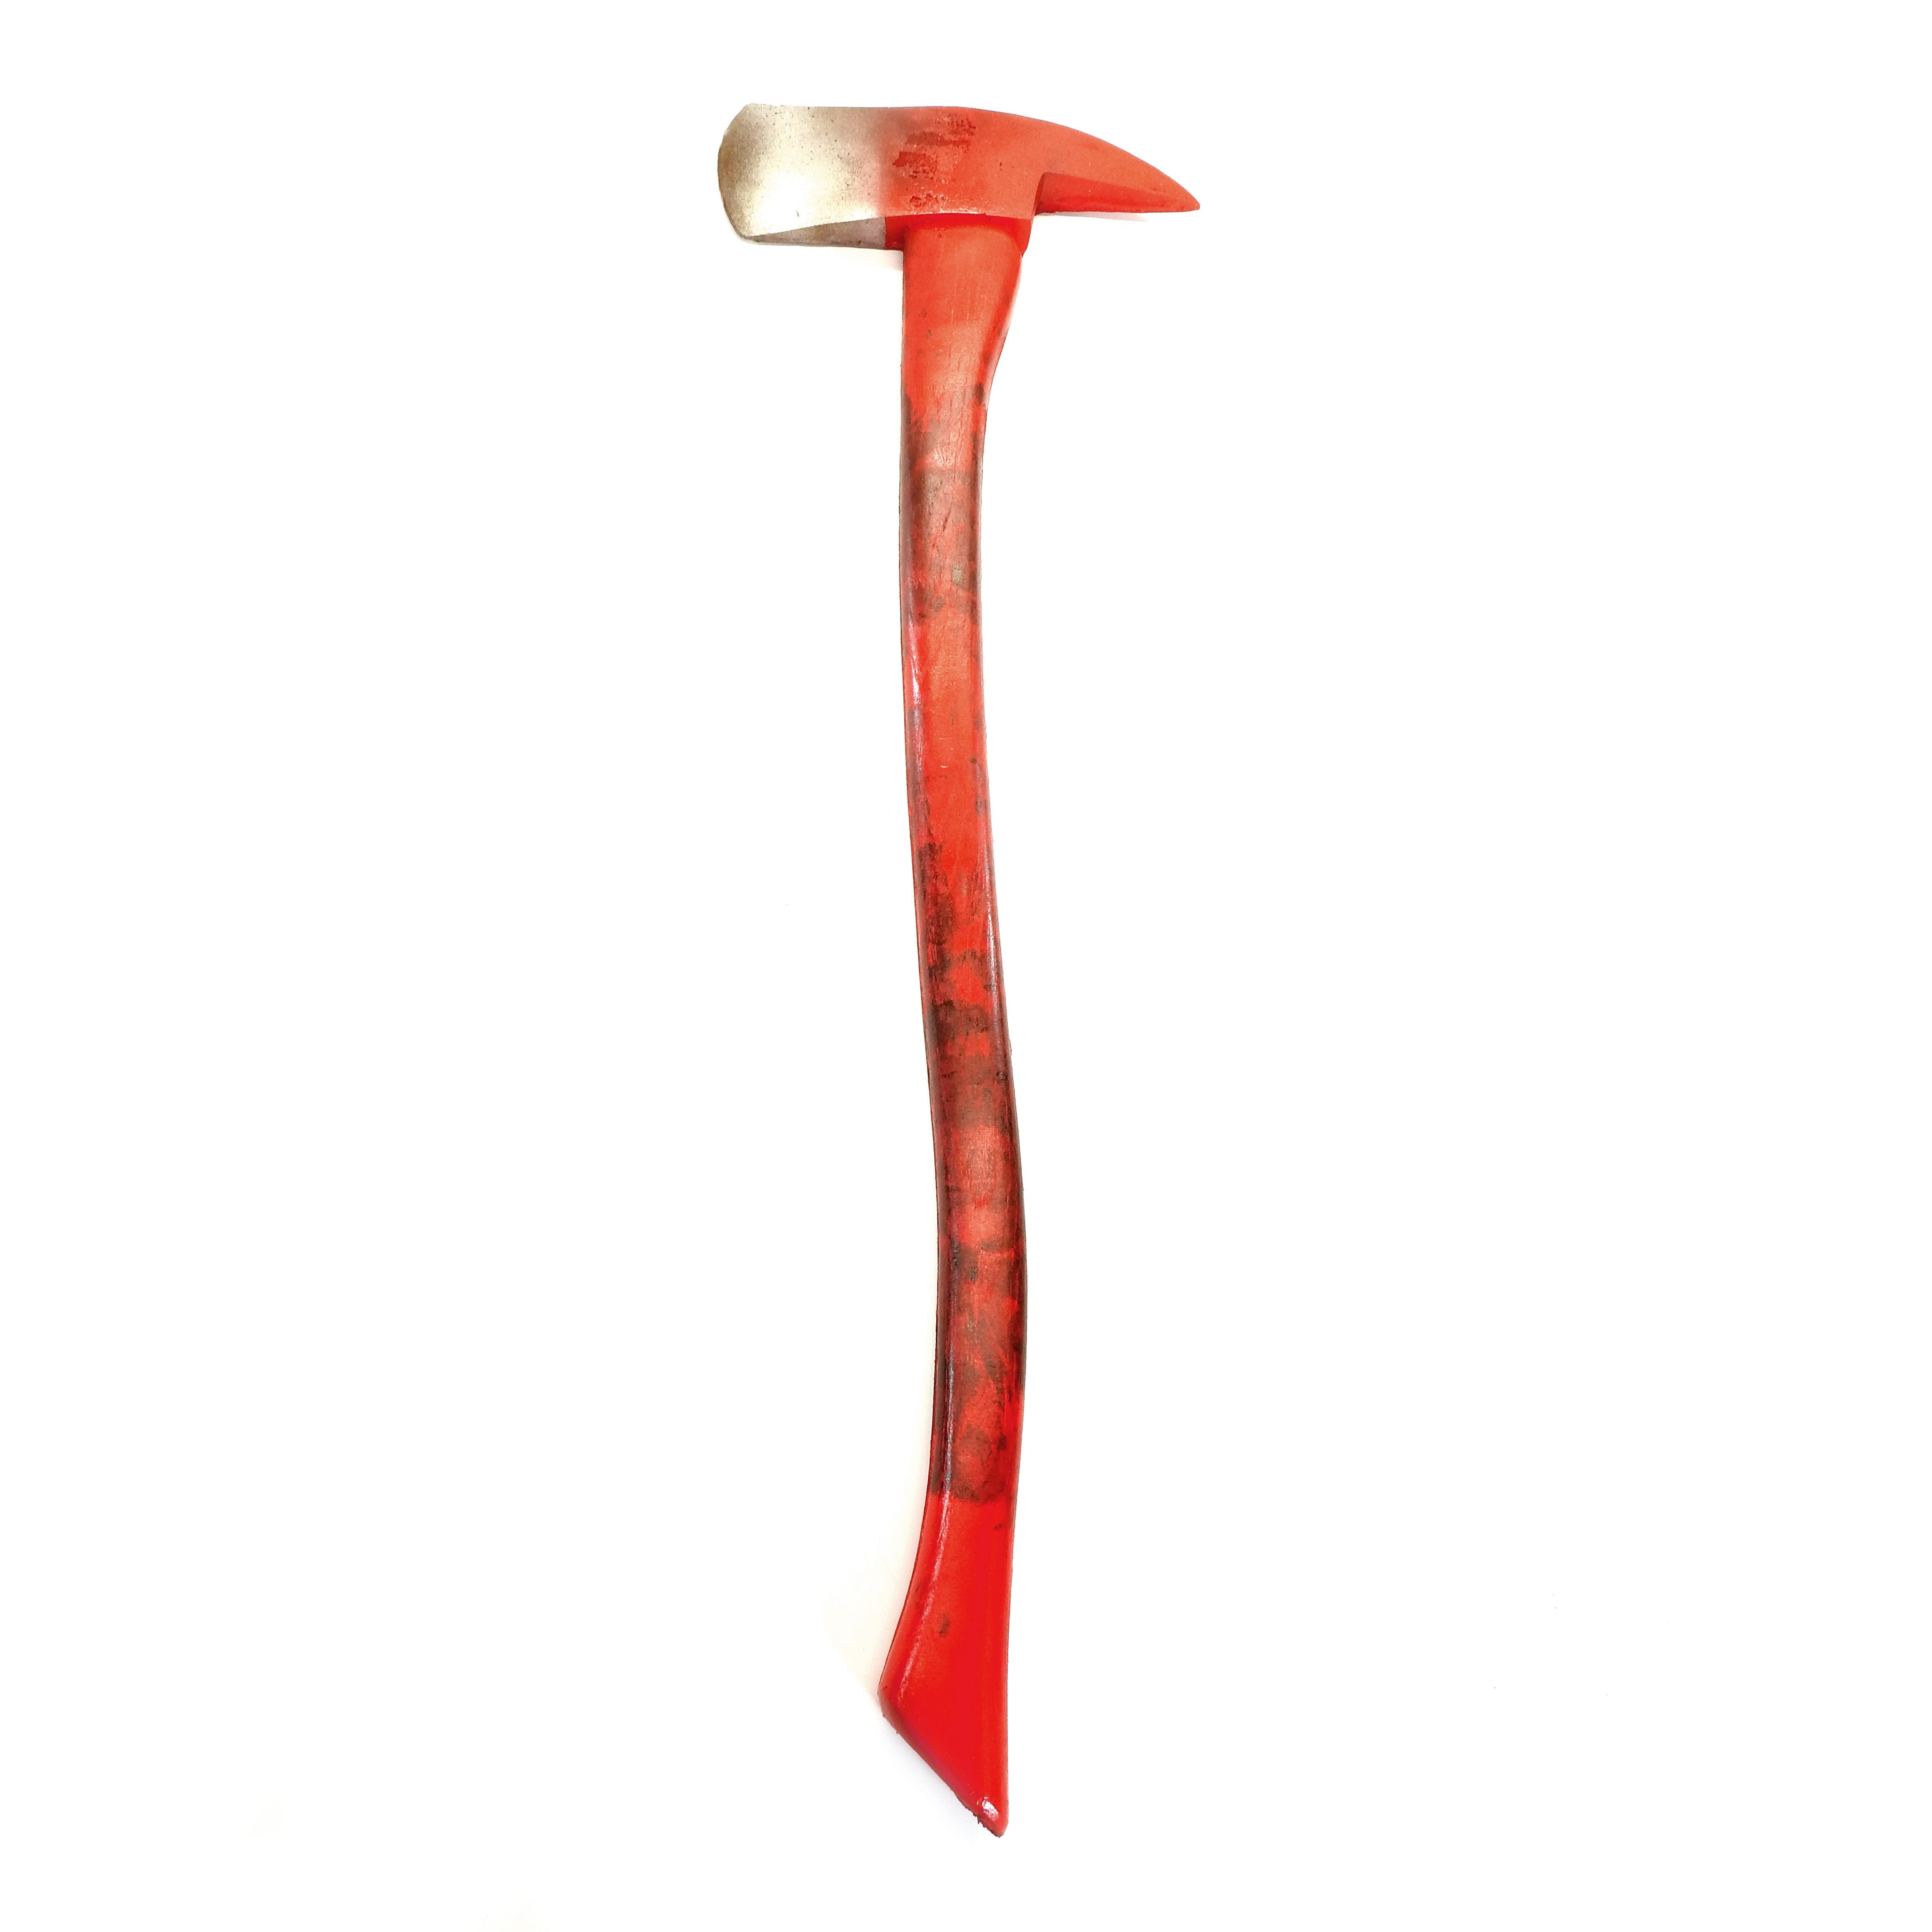 36 Inch Firefighter / Fireman's Axe Urethane Foam Rubber Stunt Prop - RUSTY - Rusty Red and Silver Head with Red Handle